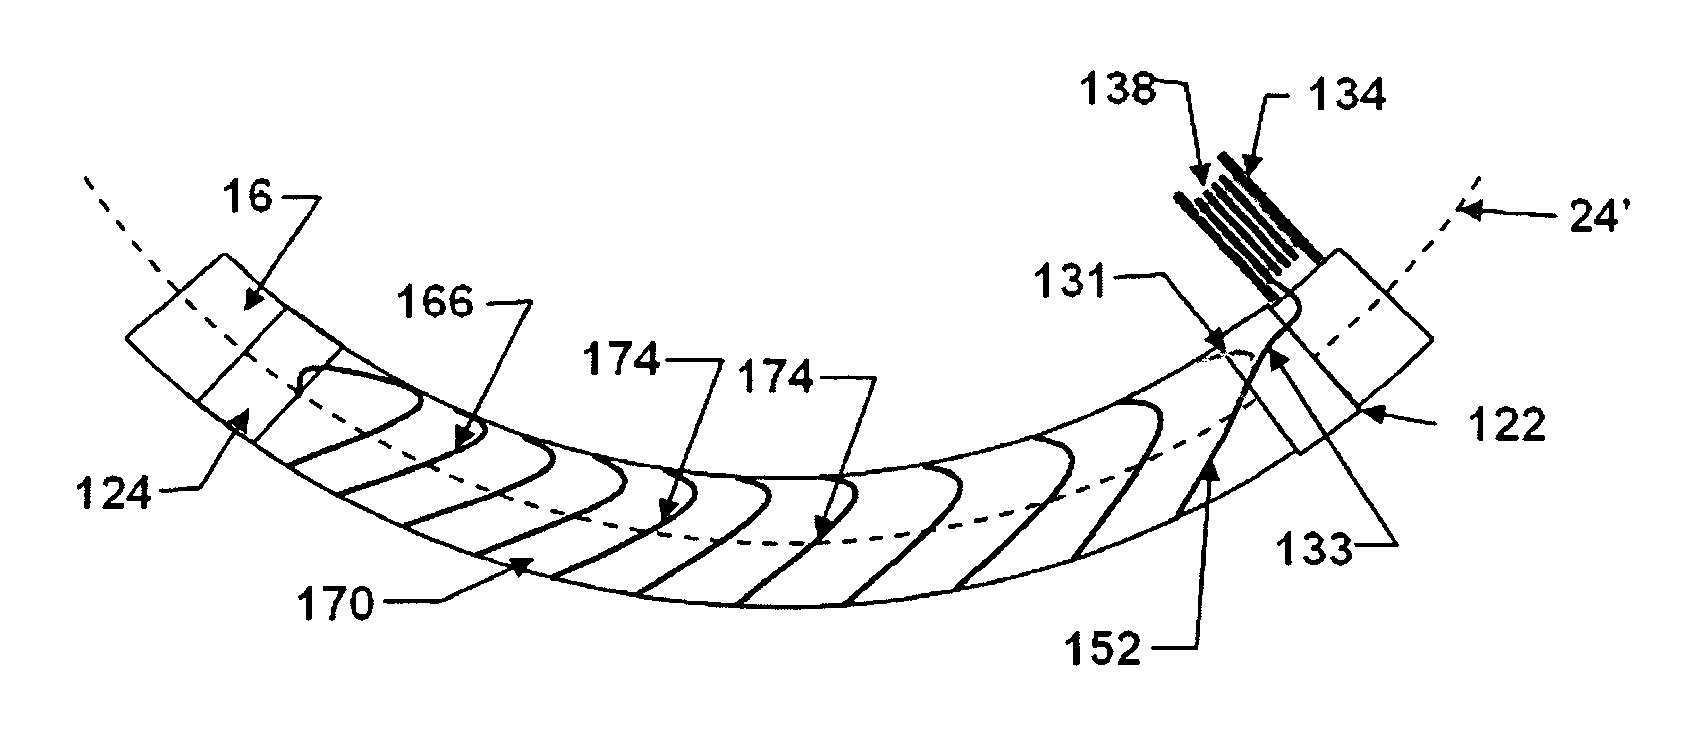 Conductor Assembly and Methods of Fabricating a Conductor Assembly With Coil Having An Arcate Shape Along A Curved Axis